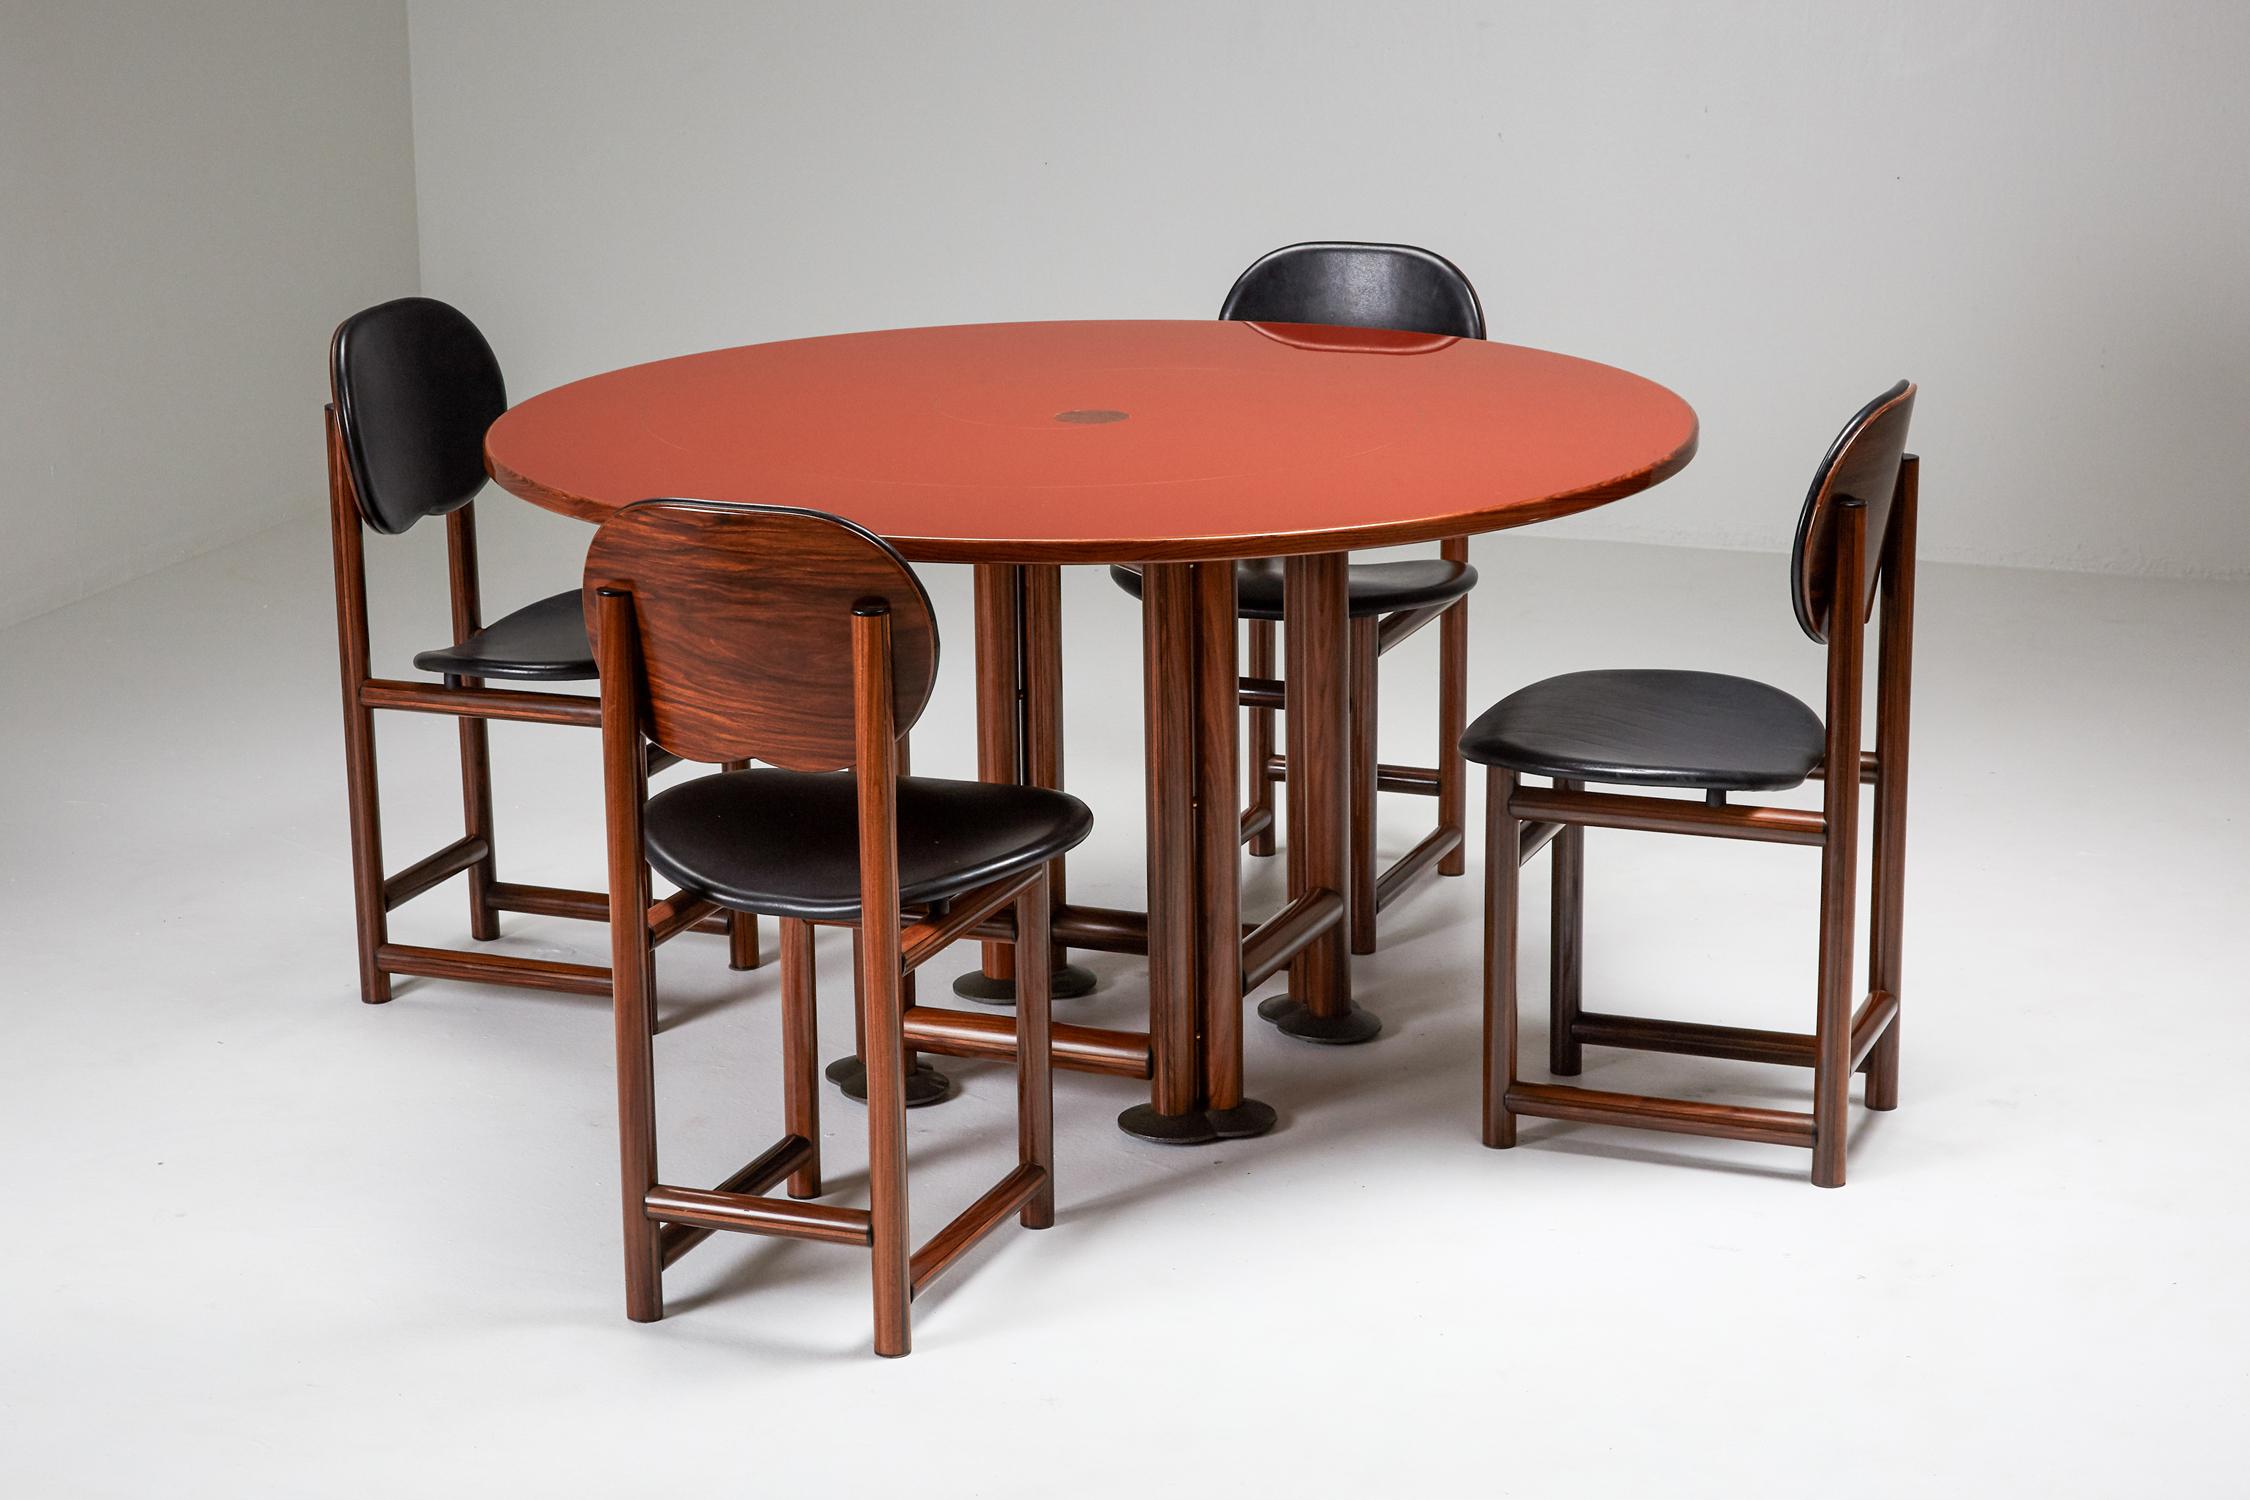 Maxalto dining table, The New Harmony series, by Afra e Tobia Scarpa , 1979

The New Harmony series, which was launched in 1979, presents a unique line by combining wood with other precious materials, such as lacquer and leather, processed with